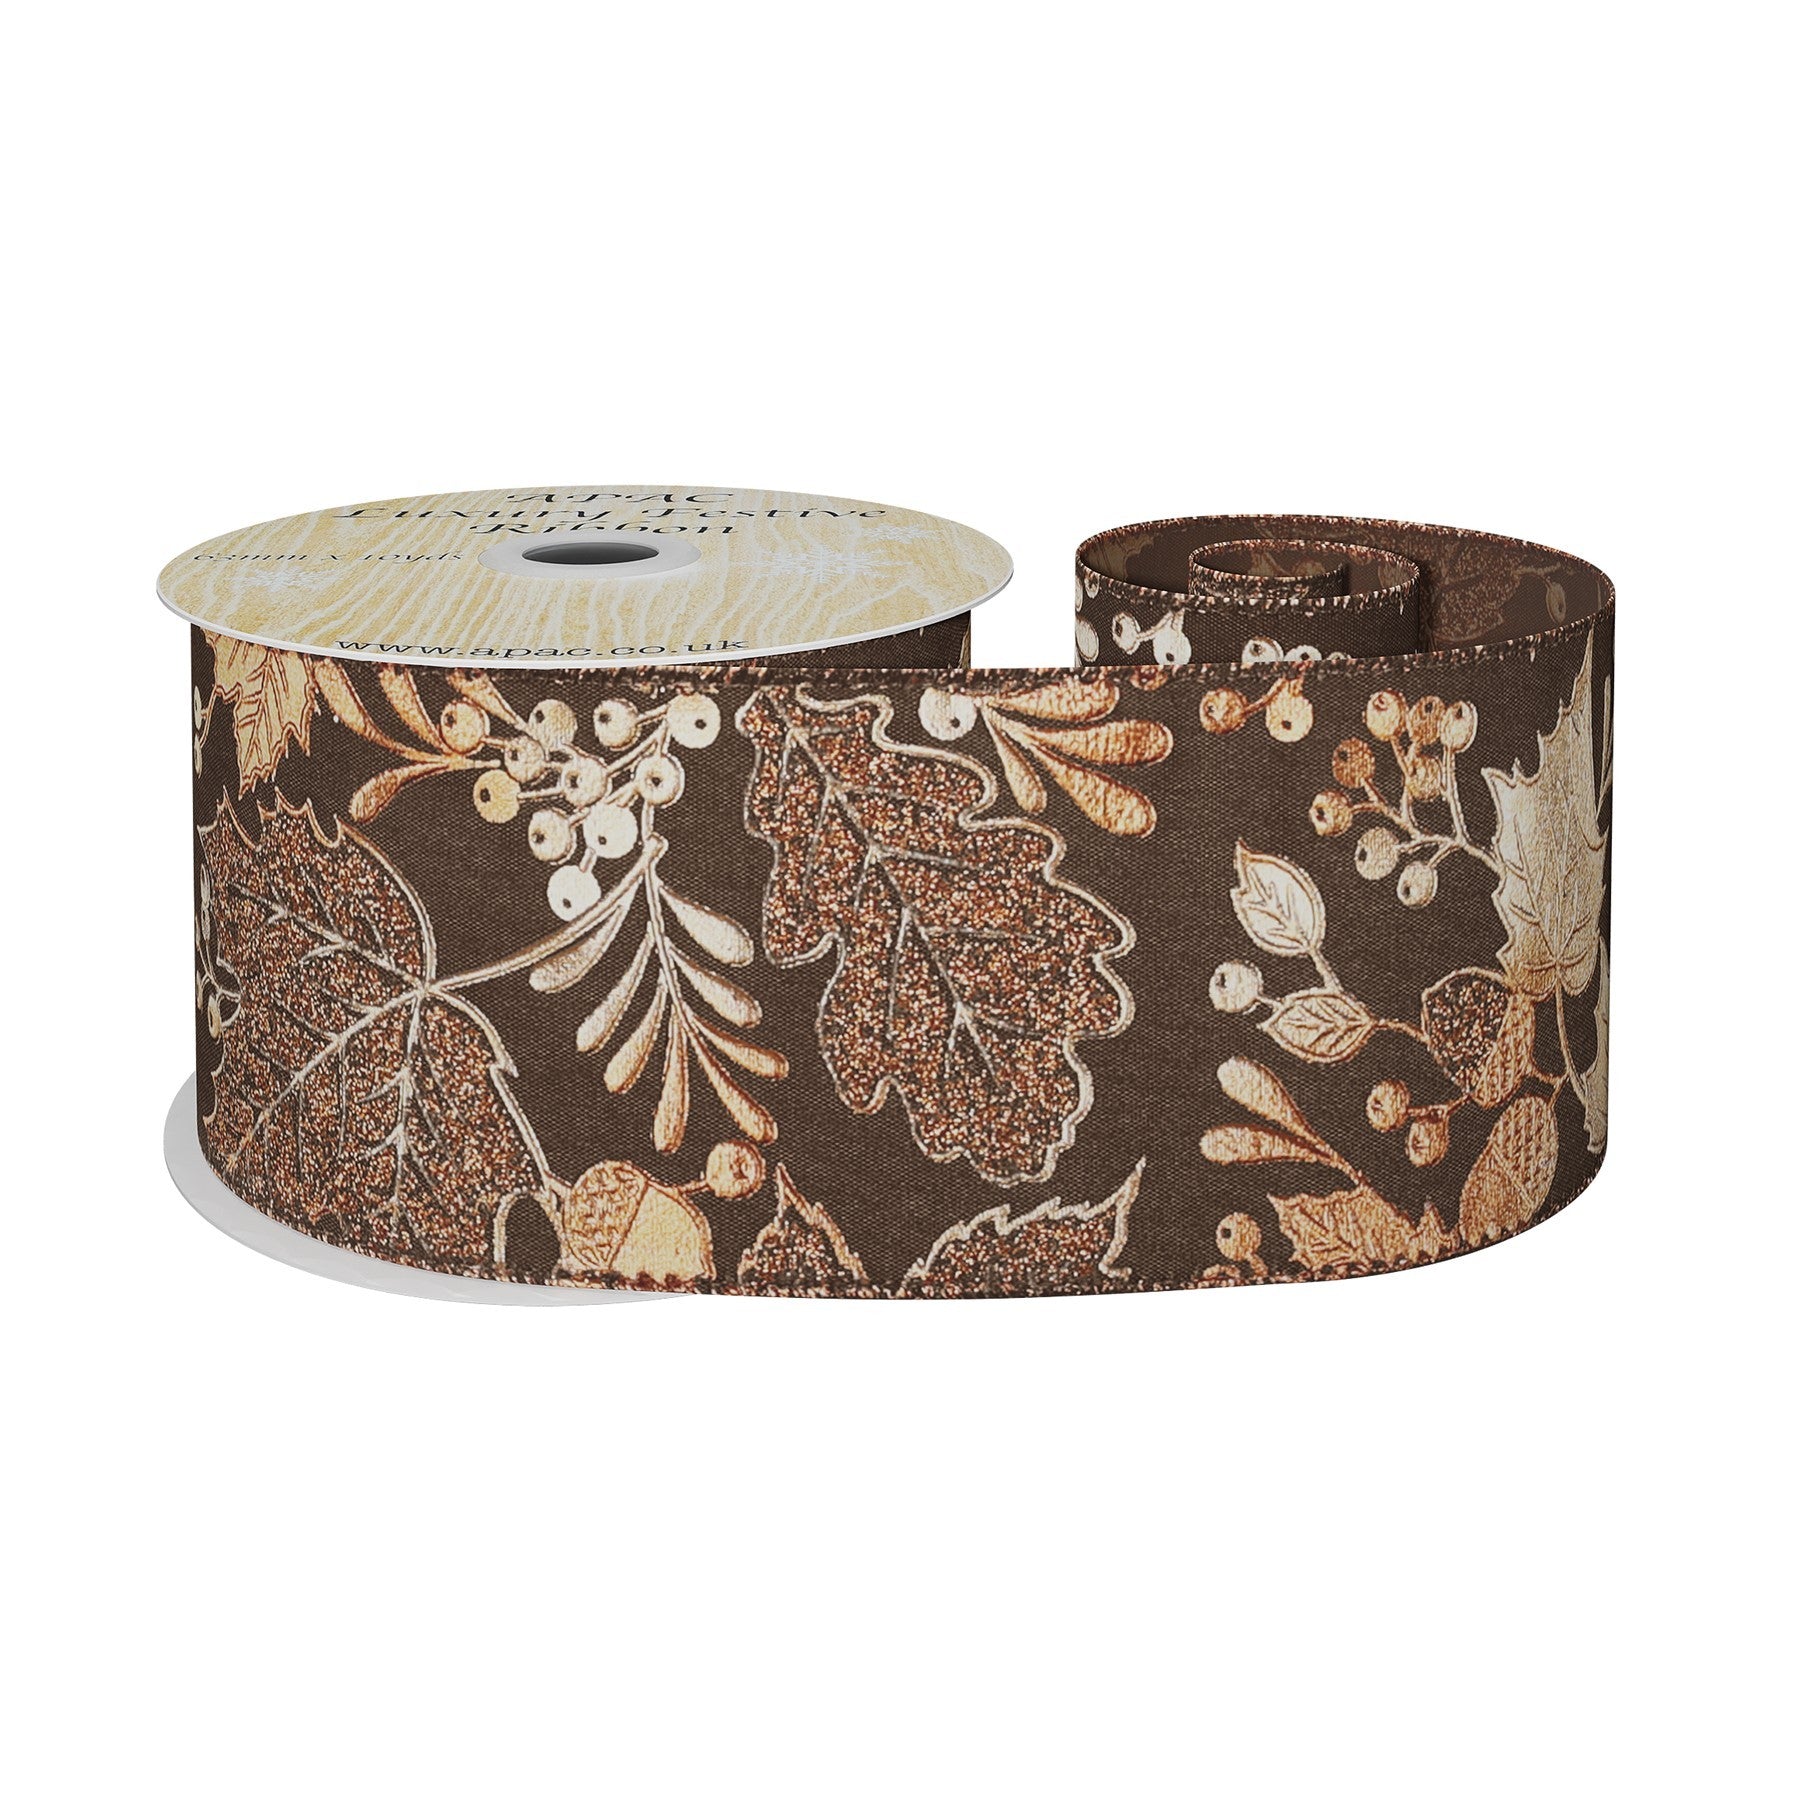 View Autumn Ribbon with Metallic Copper Leaf 63mm x 10 yards information